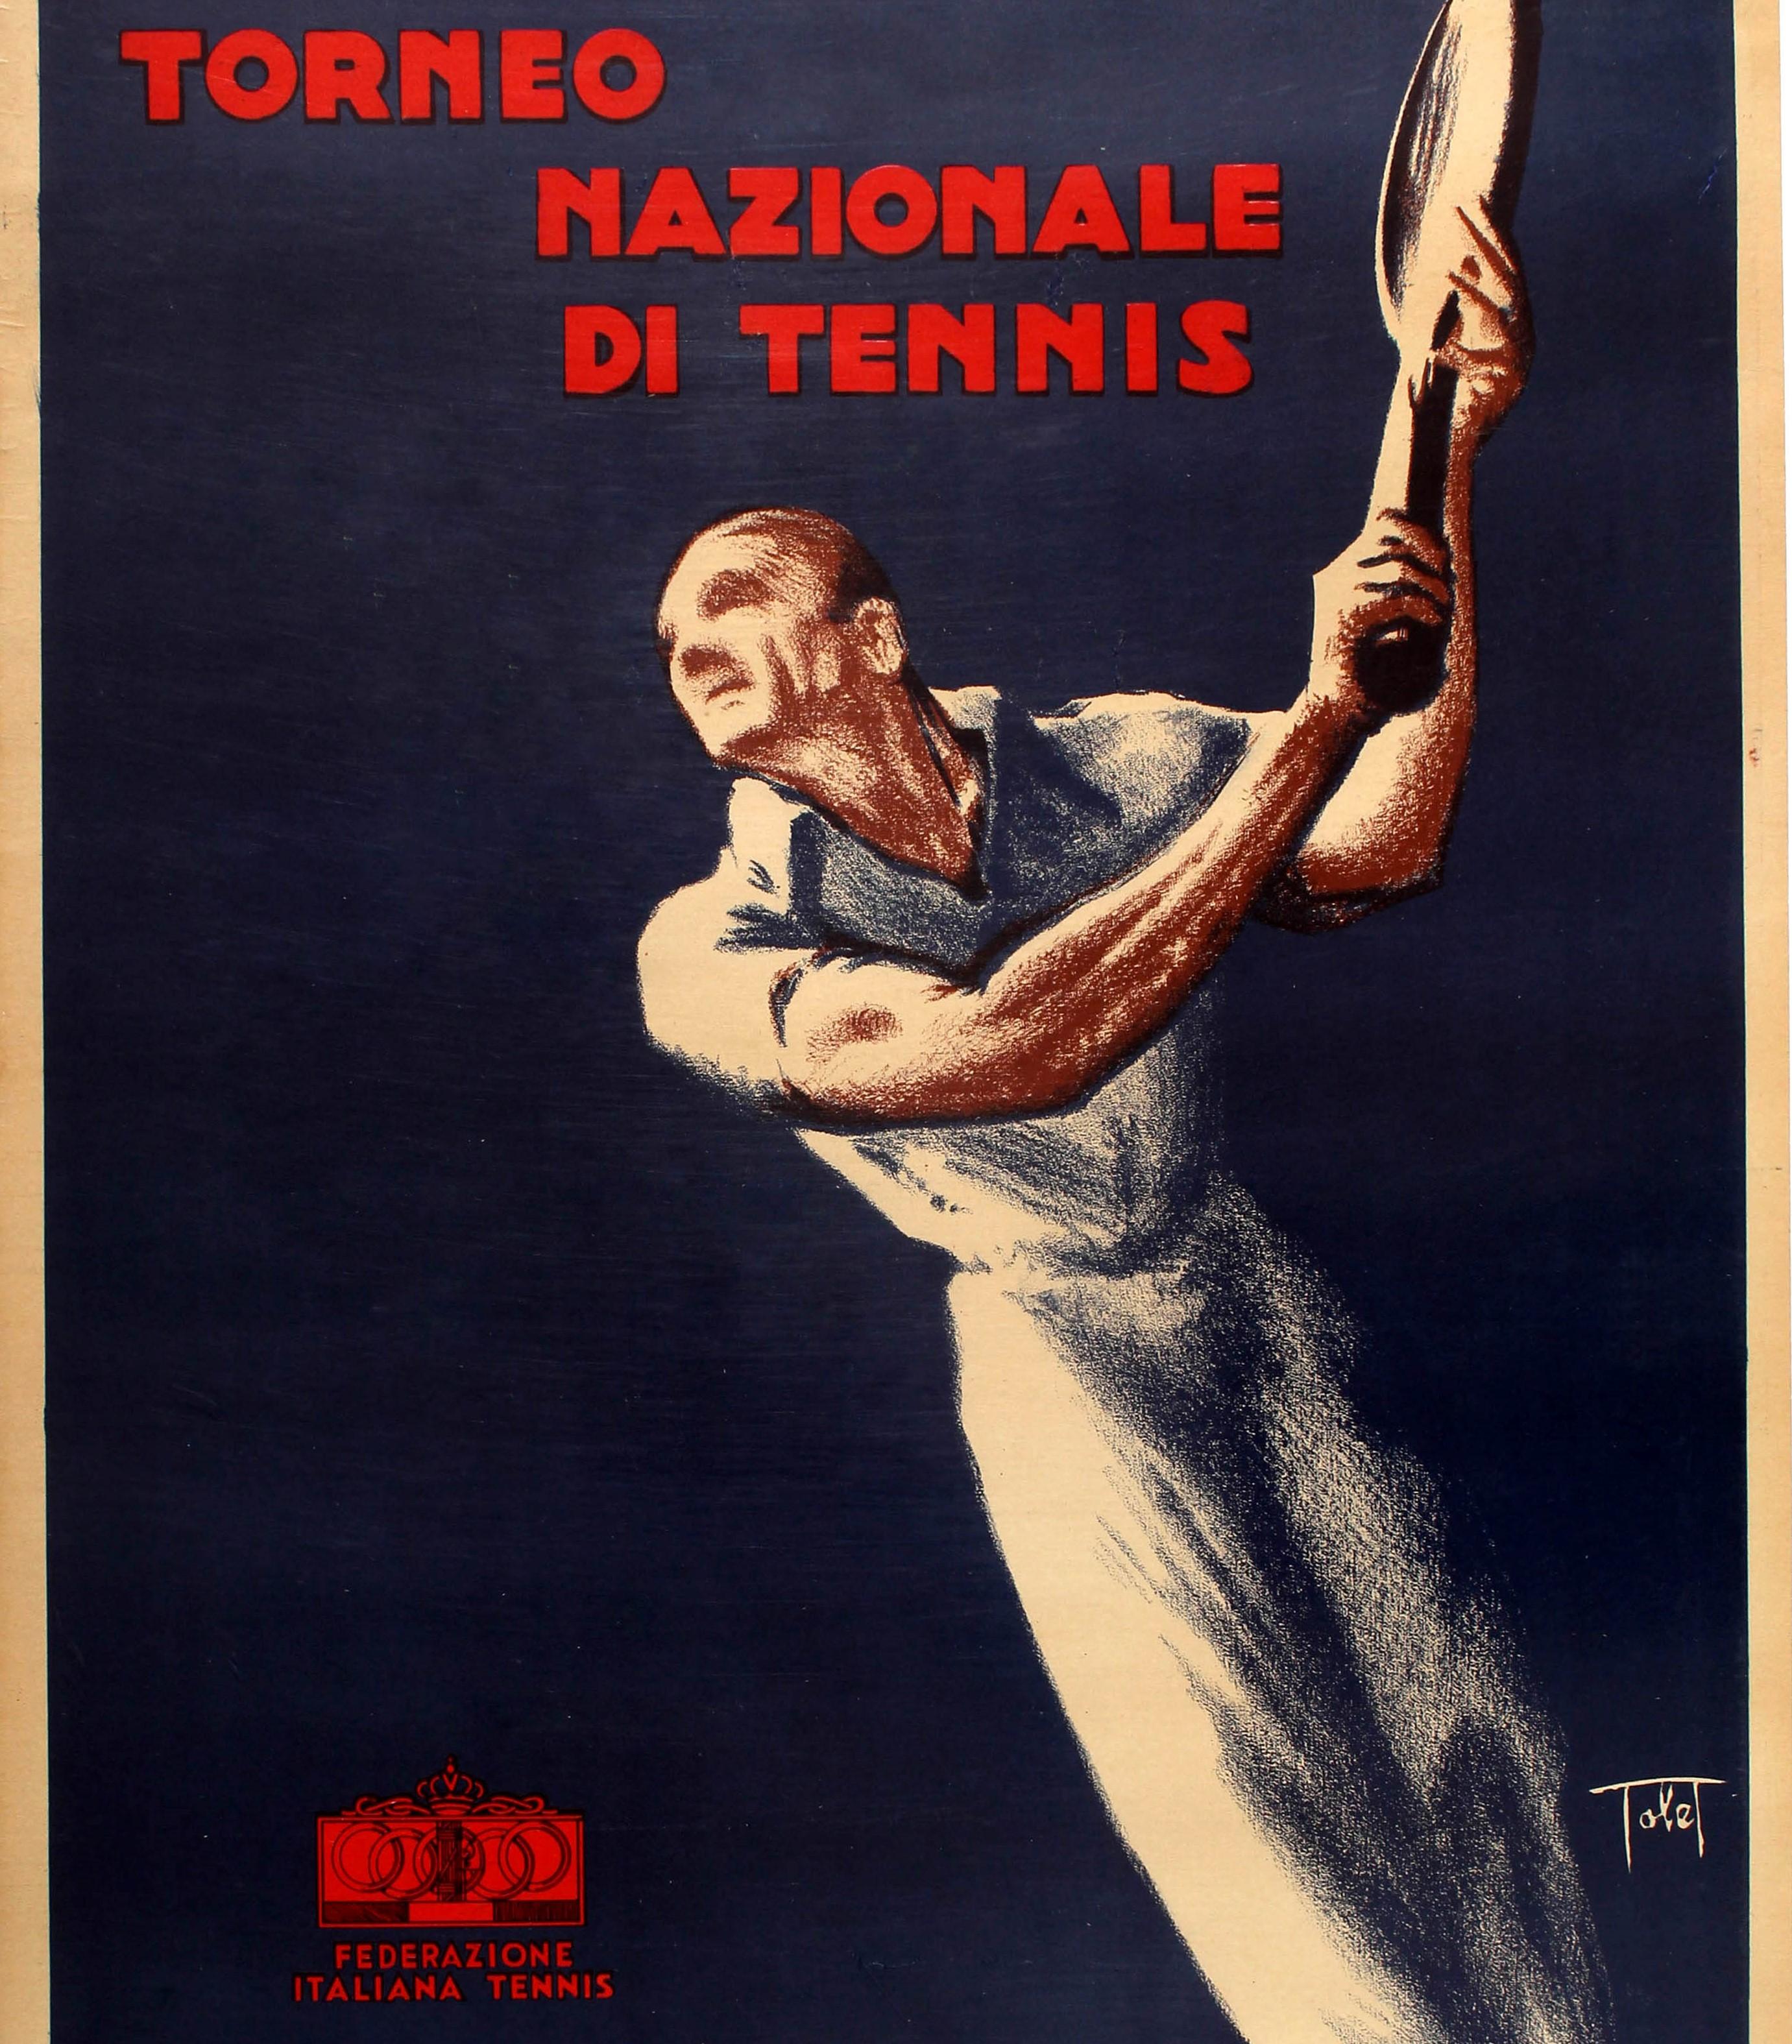 Original vintage sport poster for the Torneo Nazionale Di Tennis / National Tennis Tournament published by the Italian Tennis Federation featuring a dynamic Art Deco style illustration of a tennis player wearing a white shirt and trousers against